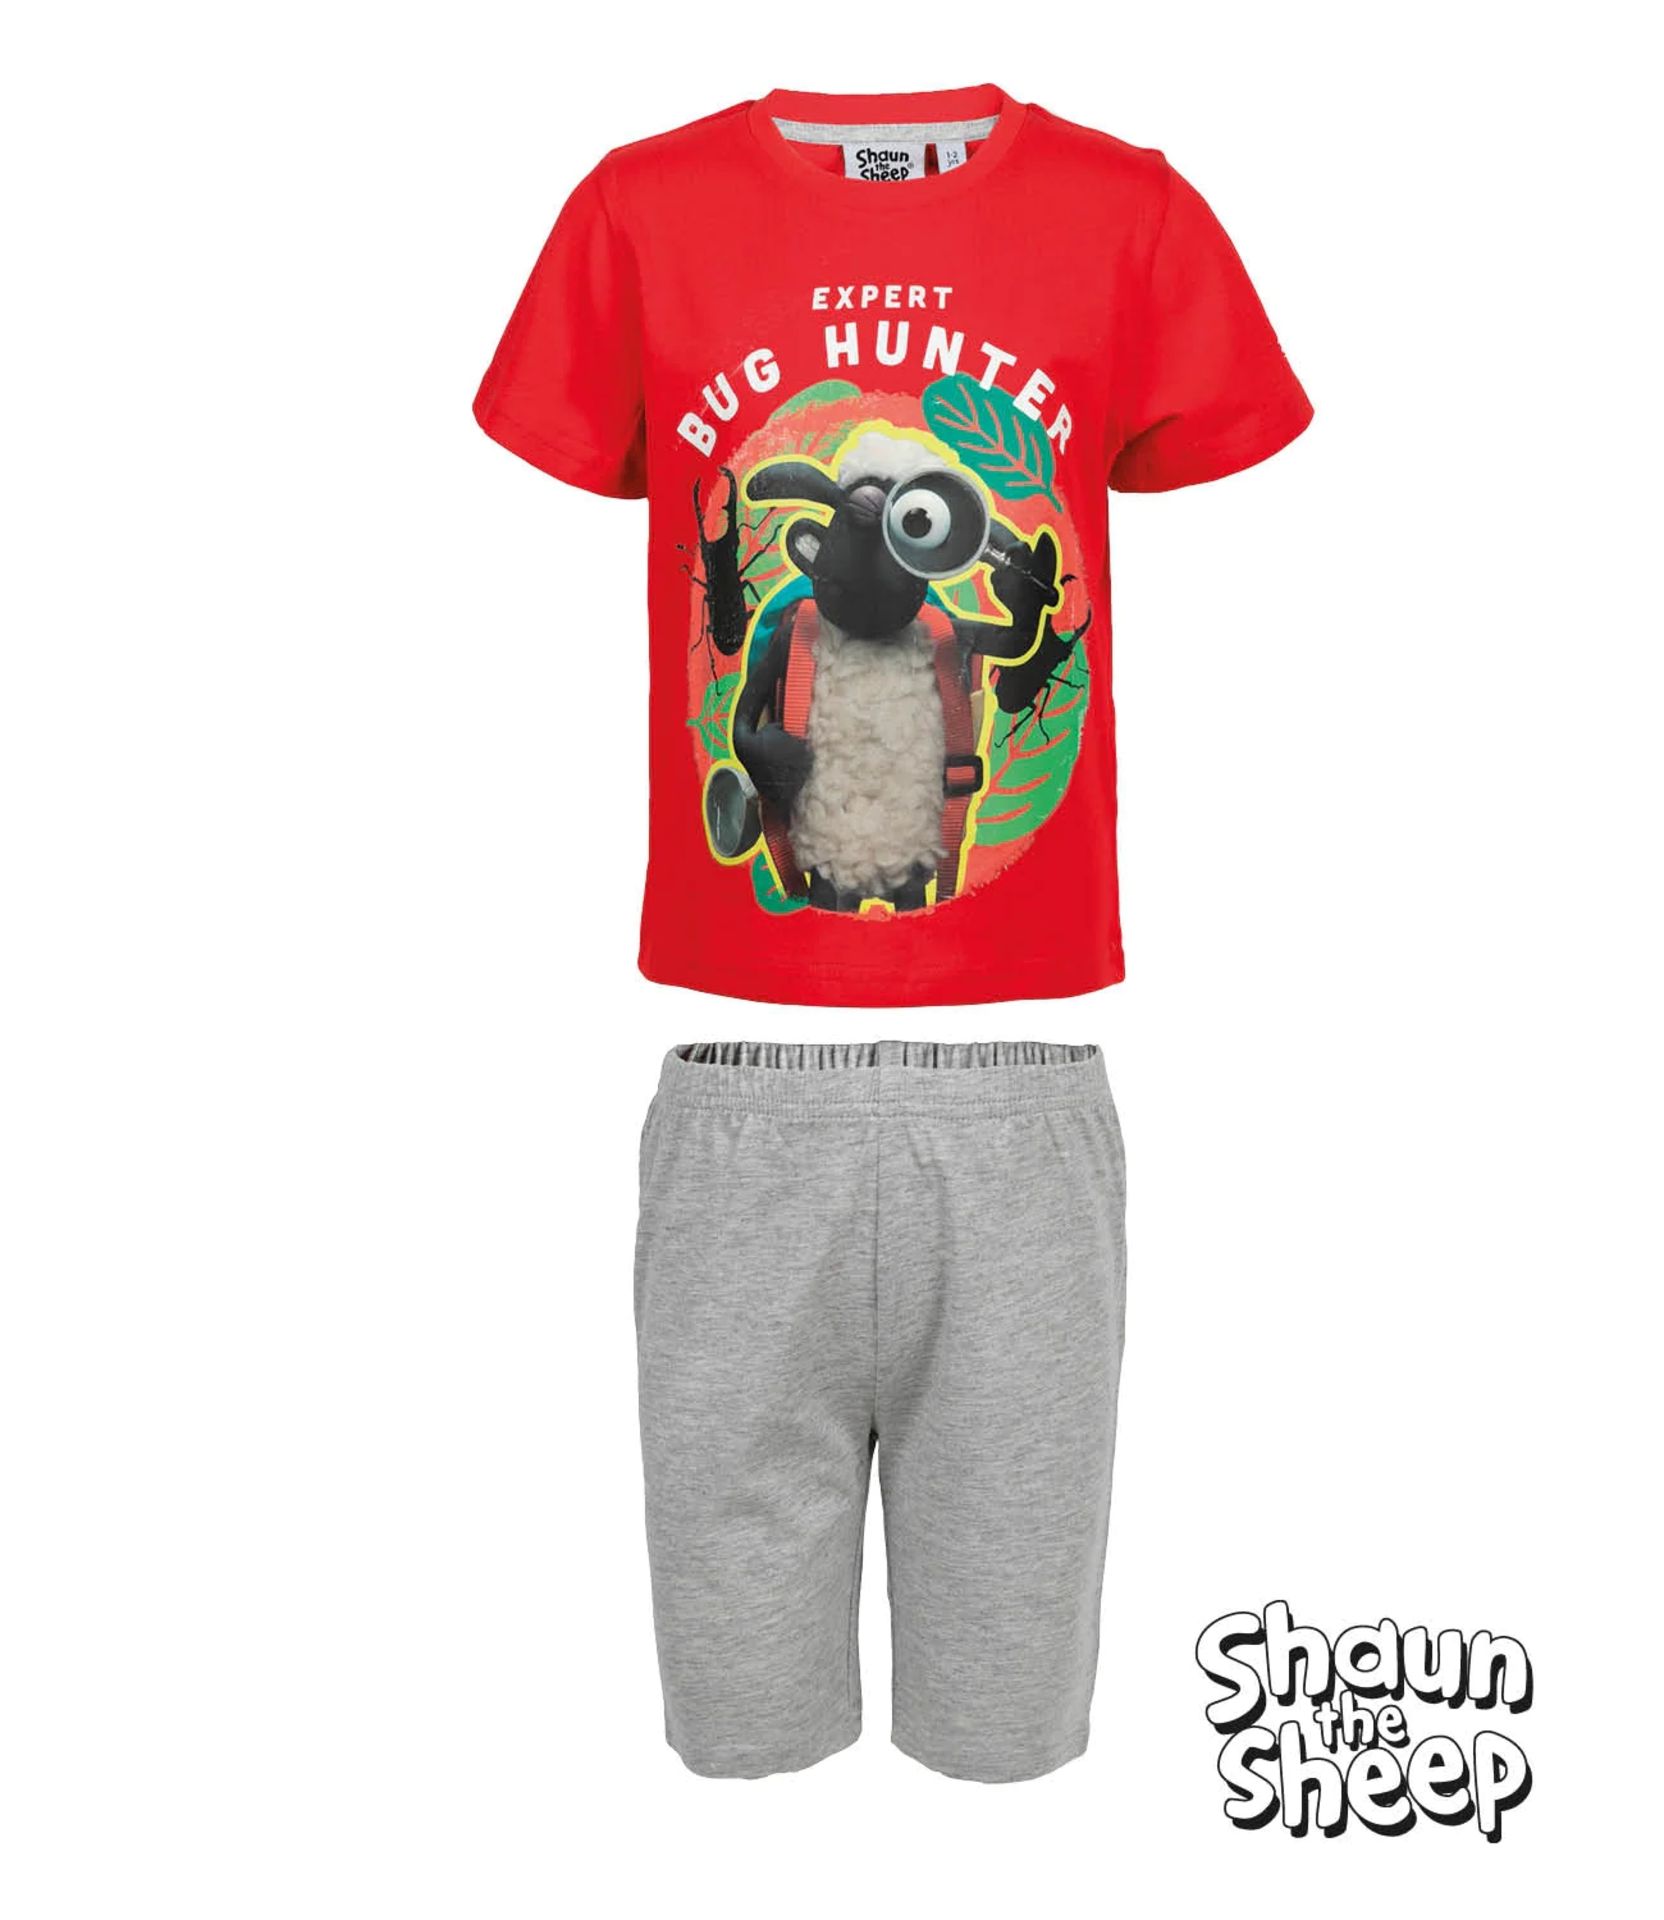 24 x New & Packaged Official Licenced Shaun The Sheep Pajamas. Sizes: 1-2, 3-4, 5-6 & 7-8. RRP £14. - Bild 2 aus 2